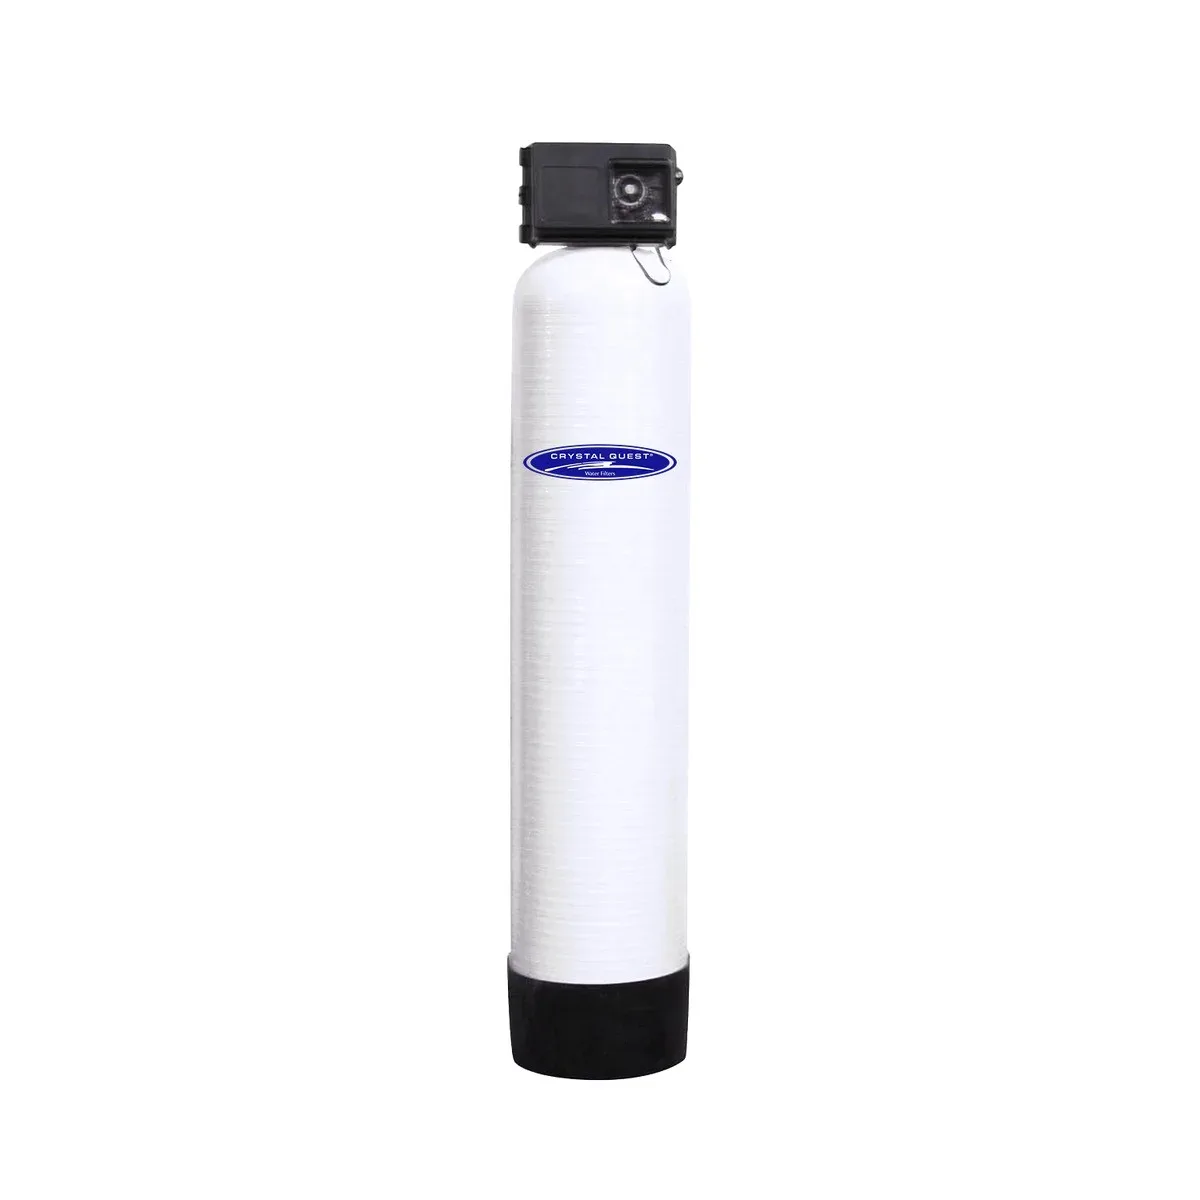 A photograph of a vertical, cylindrical water filtration system from Crystal Quest, designed for automatic metal removal, shown on a white background.